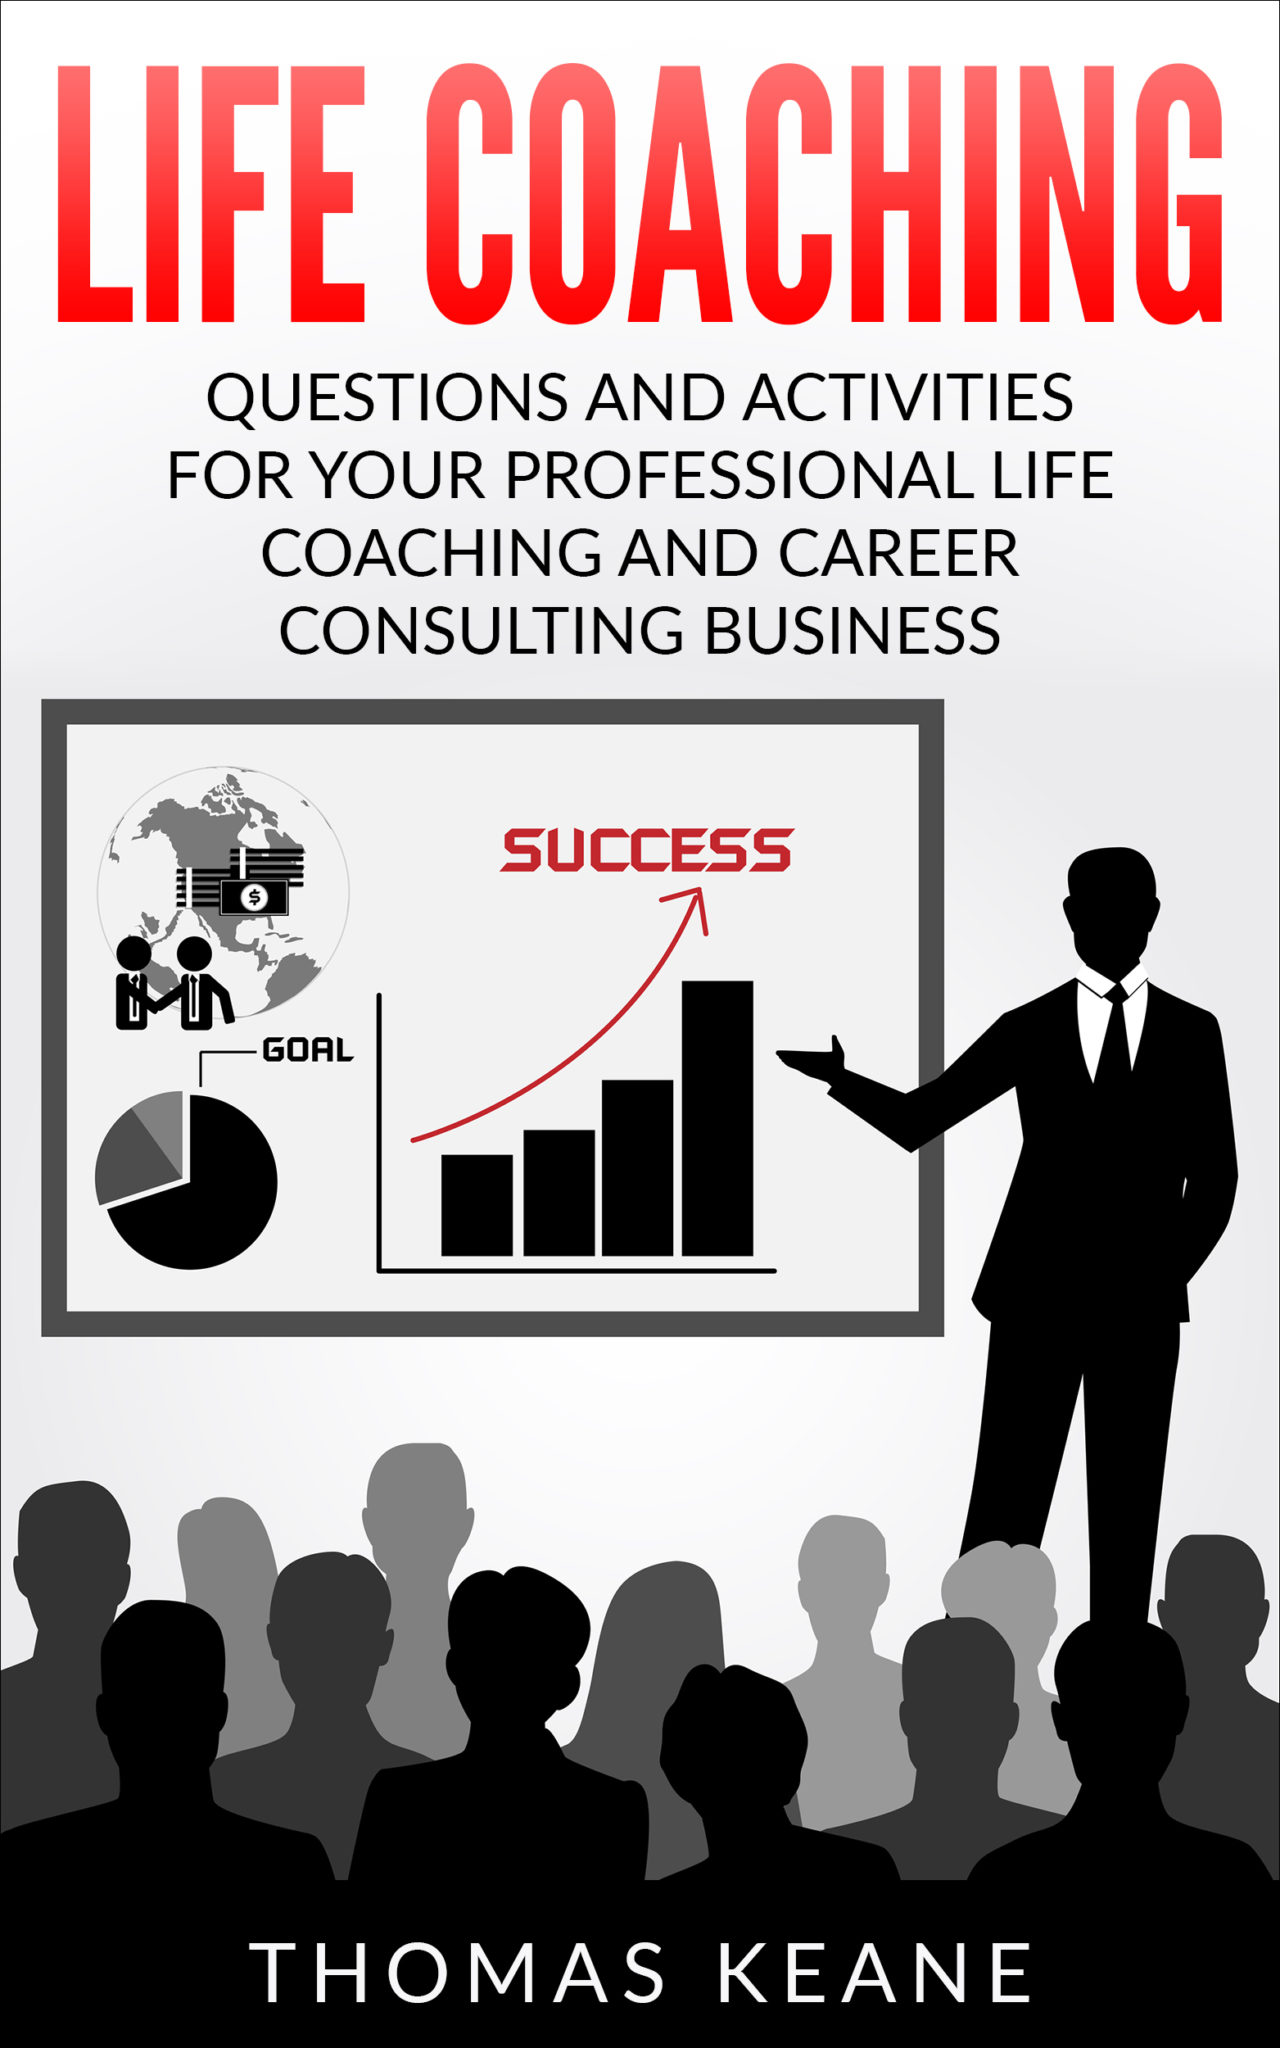 FREE: Life Coaching – Questions And Activities For Your Professional Life Coaching And Career Consulting Business by Thomas Keane